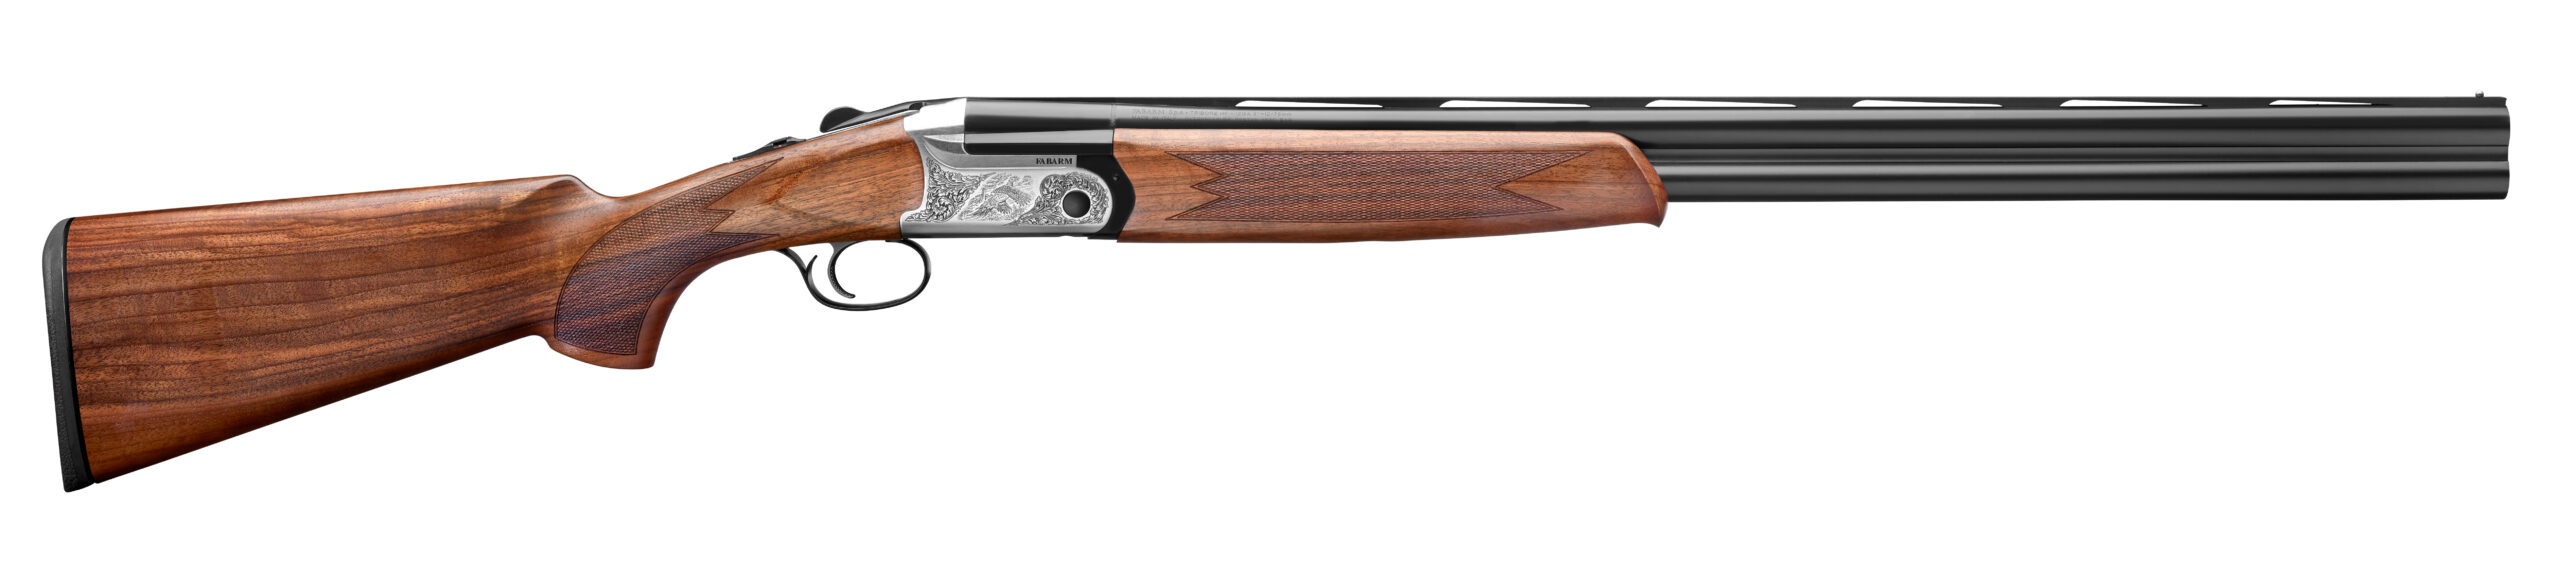 a wood-stocked double-barrel over/under shotgun from Fabarm with a metallic receiver